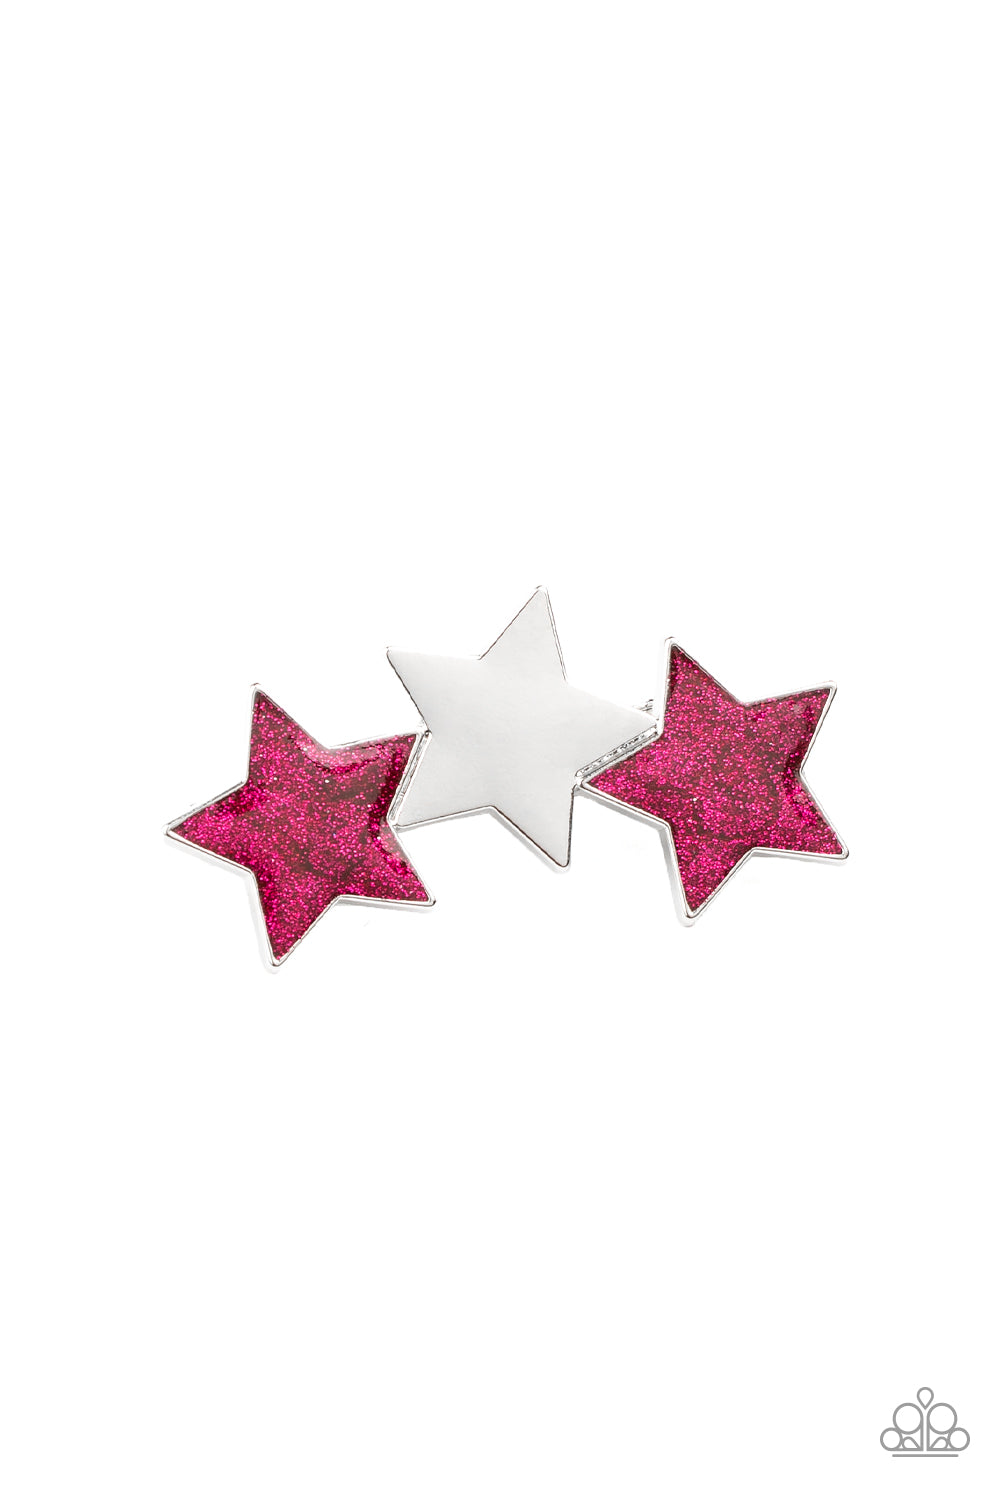 Dont Get Me STAR-ted Hair Clip (Silver, Pink, Multi)